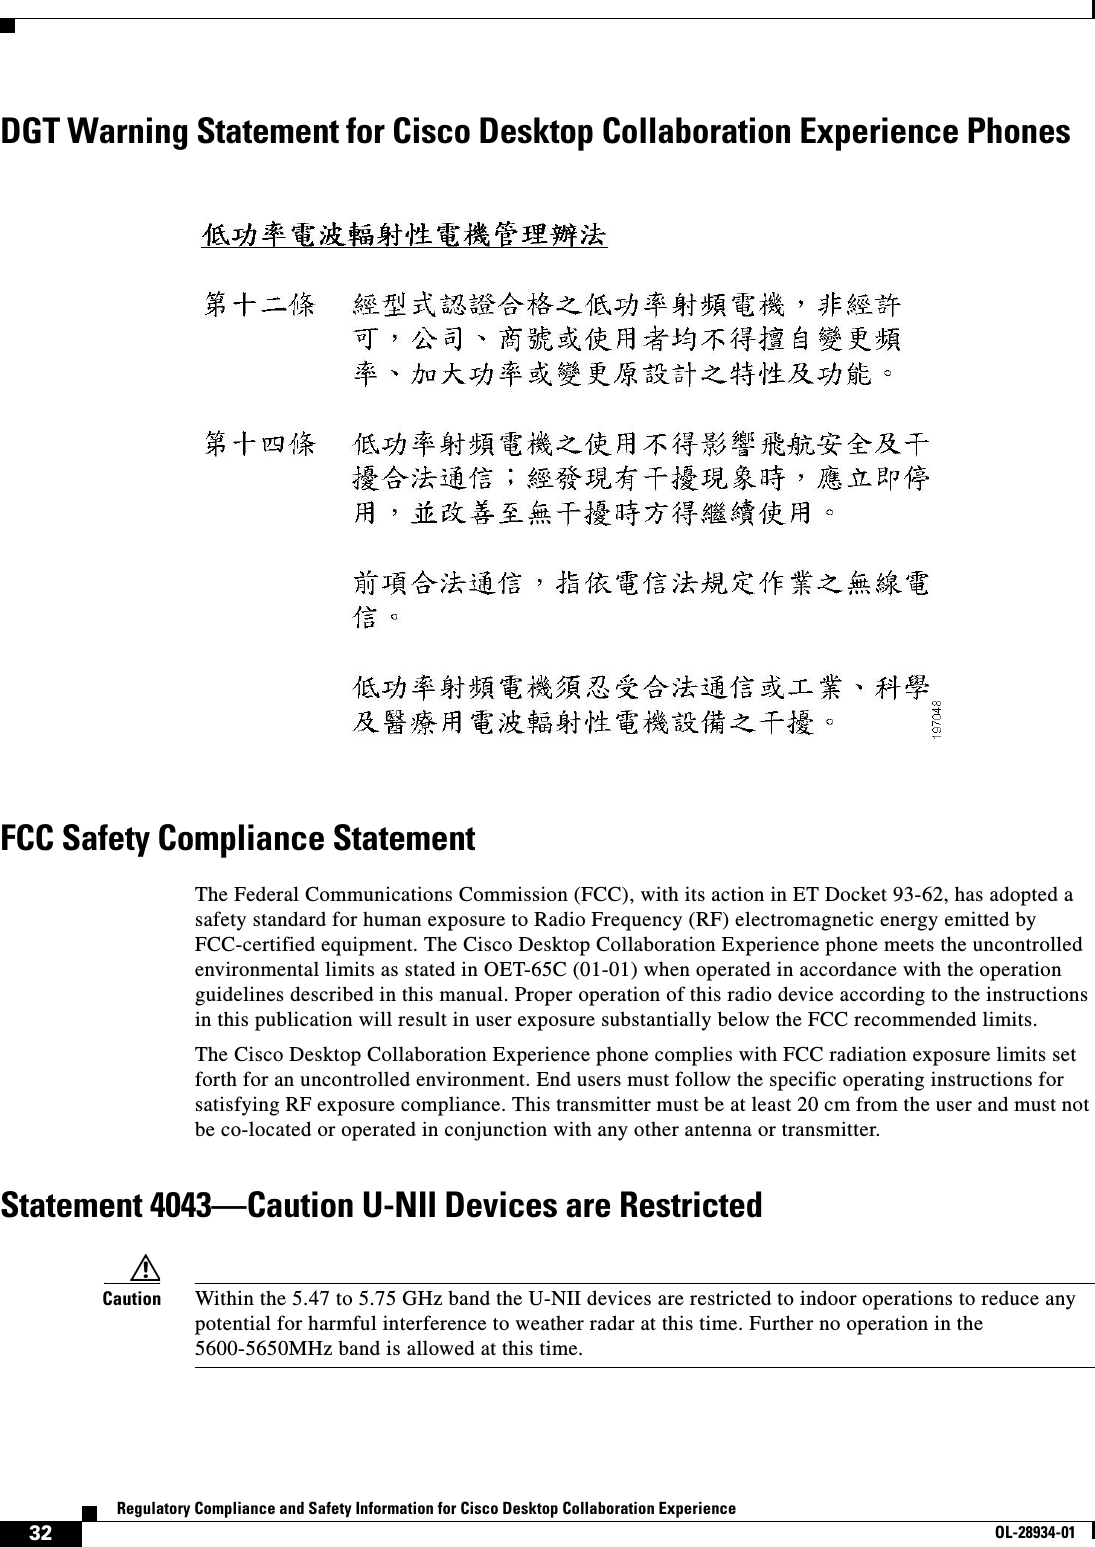  32Regulatory Compliance and Safety Information for Cisco Desktop Collaboration ExperienceOL-28934-01DGT Warning Statement for Cisco Desktop Collaboration Experience PhonesFCC Safety Compliance StatementThe Federal Communications Commission (FCC), with its action in ET Docket 93-62, has adopted a safety standard for human exposure to Radio Frequency (RF) electromagnetic energy emitted by FCC-certified equipment. The Cisco Desktop Collaboration Experience phone meets the uncontrolled environmental limits as stated in OET-65C (01-01) when operated in accordance with the operation guidelines described in this manual. Proper operation of this radio device according to the instructions in this publication will result in user exposure substantially below the FCC recommended limits.The Cisco Desktop Collaboration Experience phone complies with FCC radiation exposure limits set forth for an uncontrolled environment. End users must follow the specific operating instructions for satisfying RF exposure compliance. This transmitter must be at least 20 cm from the user and must not be co-located or operated in conjunction with any other antenna or transmitter.Statement 4043—Caution U-NII Devices are RestrictedCaution Within the 5.47 to 5.75 GHz band the U-NII devices are restricted to indoor operations to reduce any potential for harmful interference to weather radar at this time. Further no operation in the 5600-5650MHz band is allowed at this time.